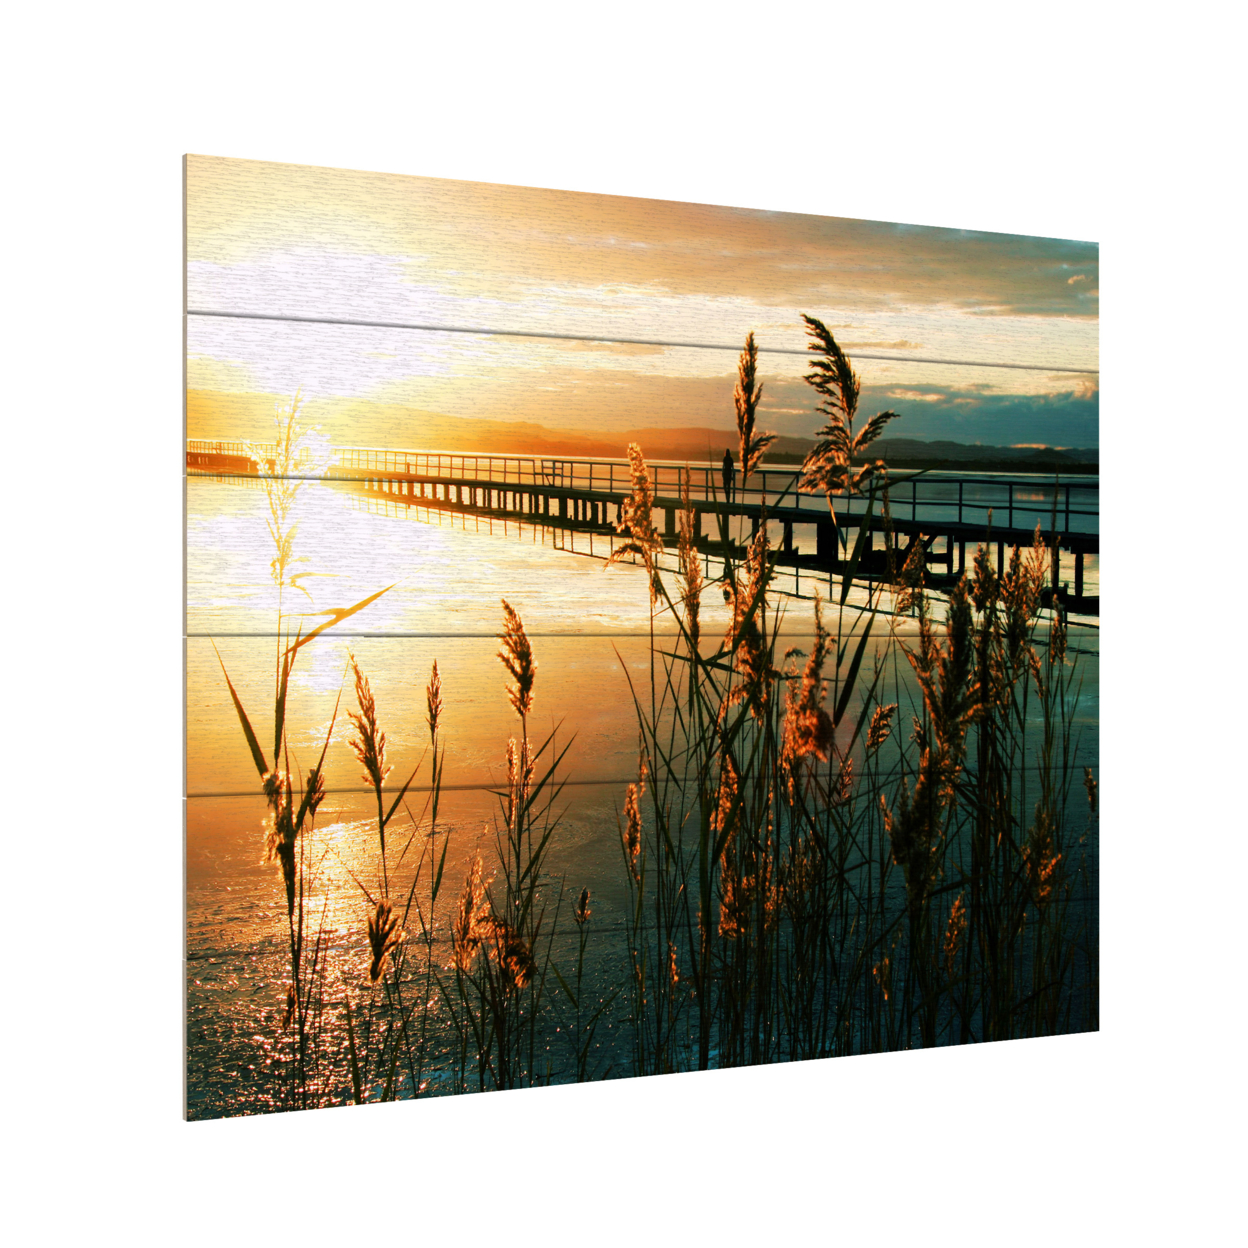 Wooden Slat Art 18 X 22 Inches Titled Wish You Were Here Ready To Hang Home Decor Picture